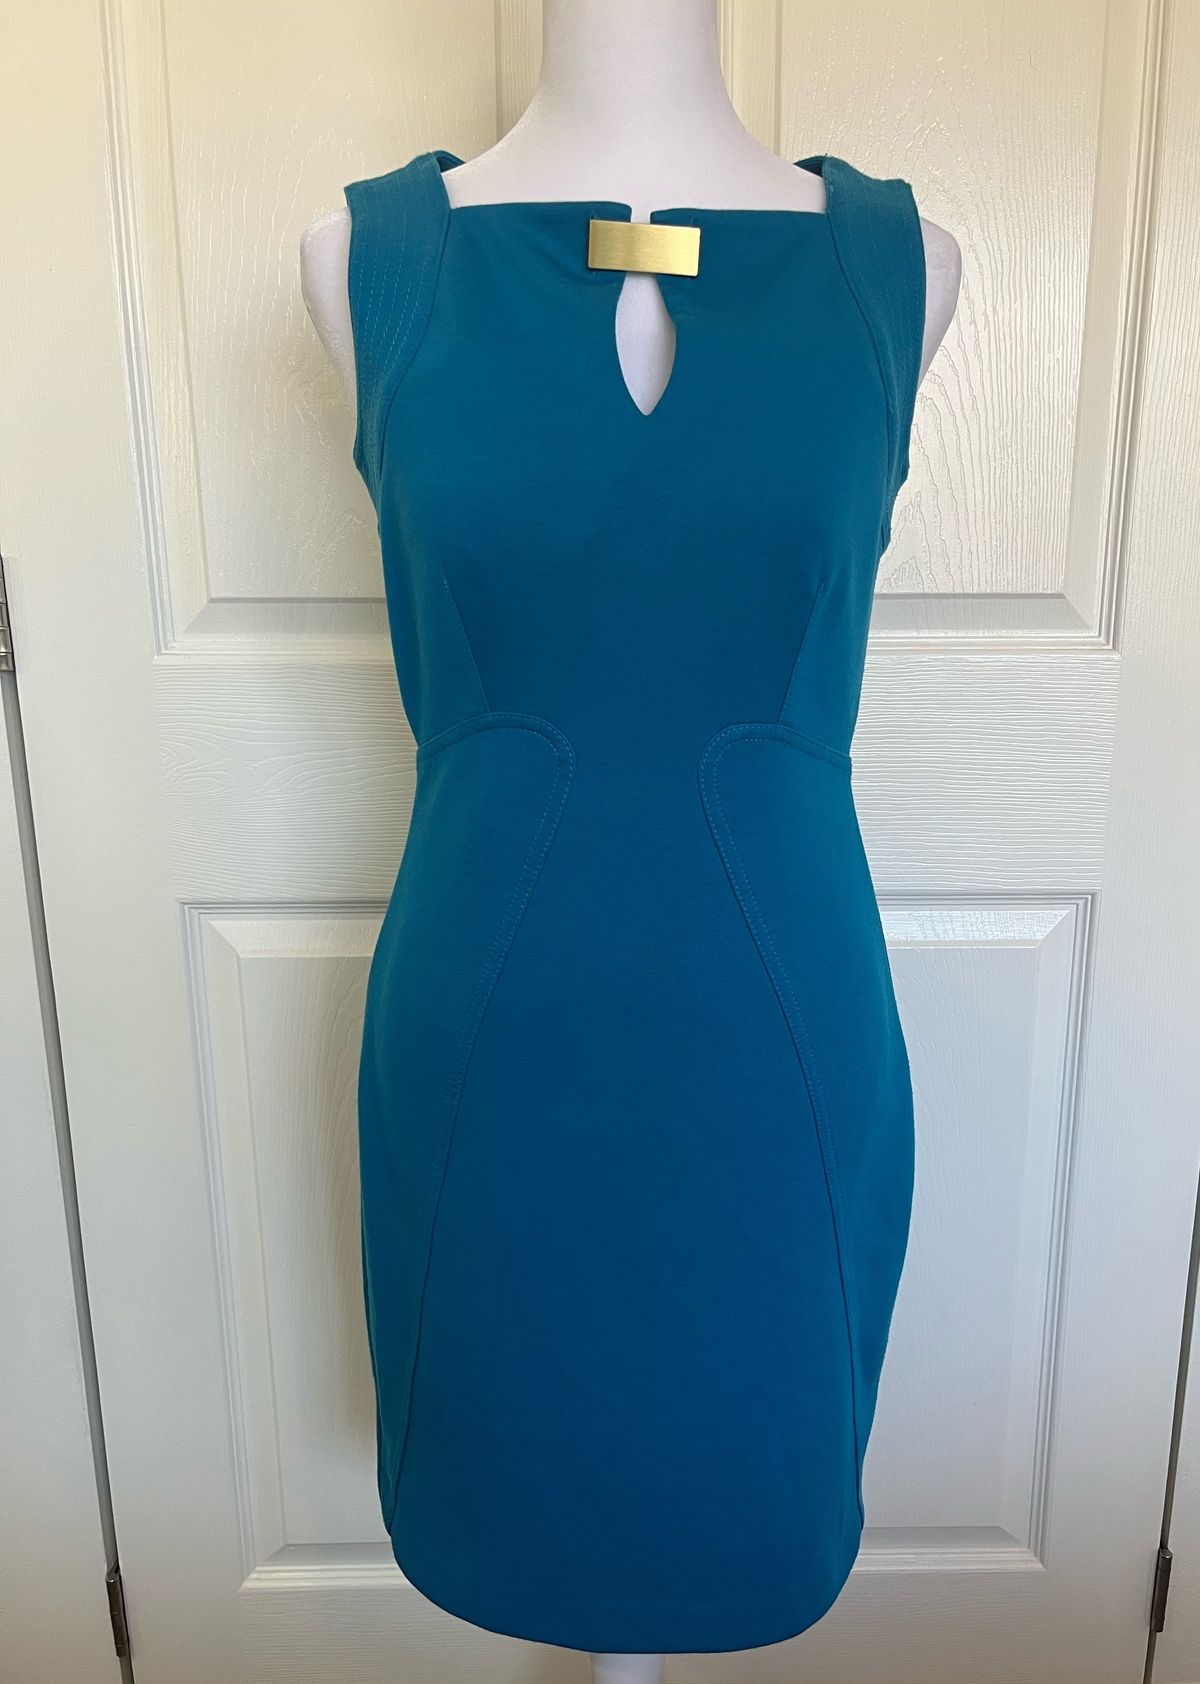 Laundry by Shelli Segal Size 2 High Neck Blue Cocktail Dress on Queenly